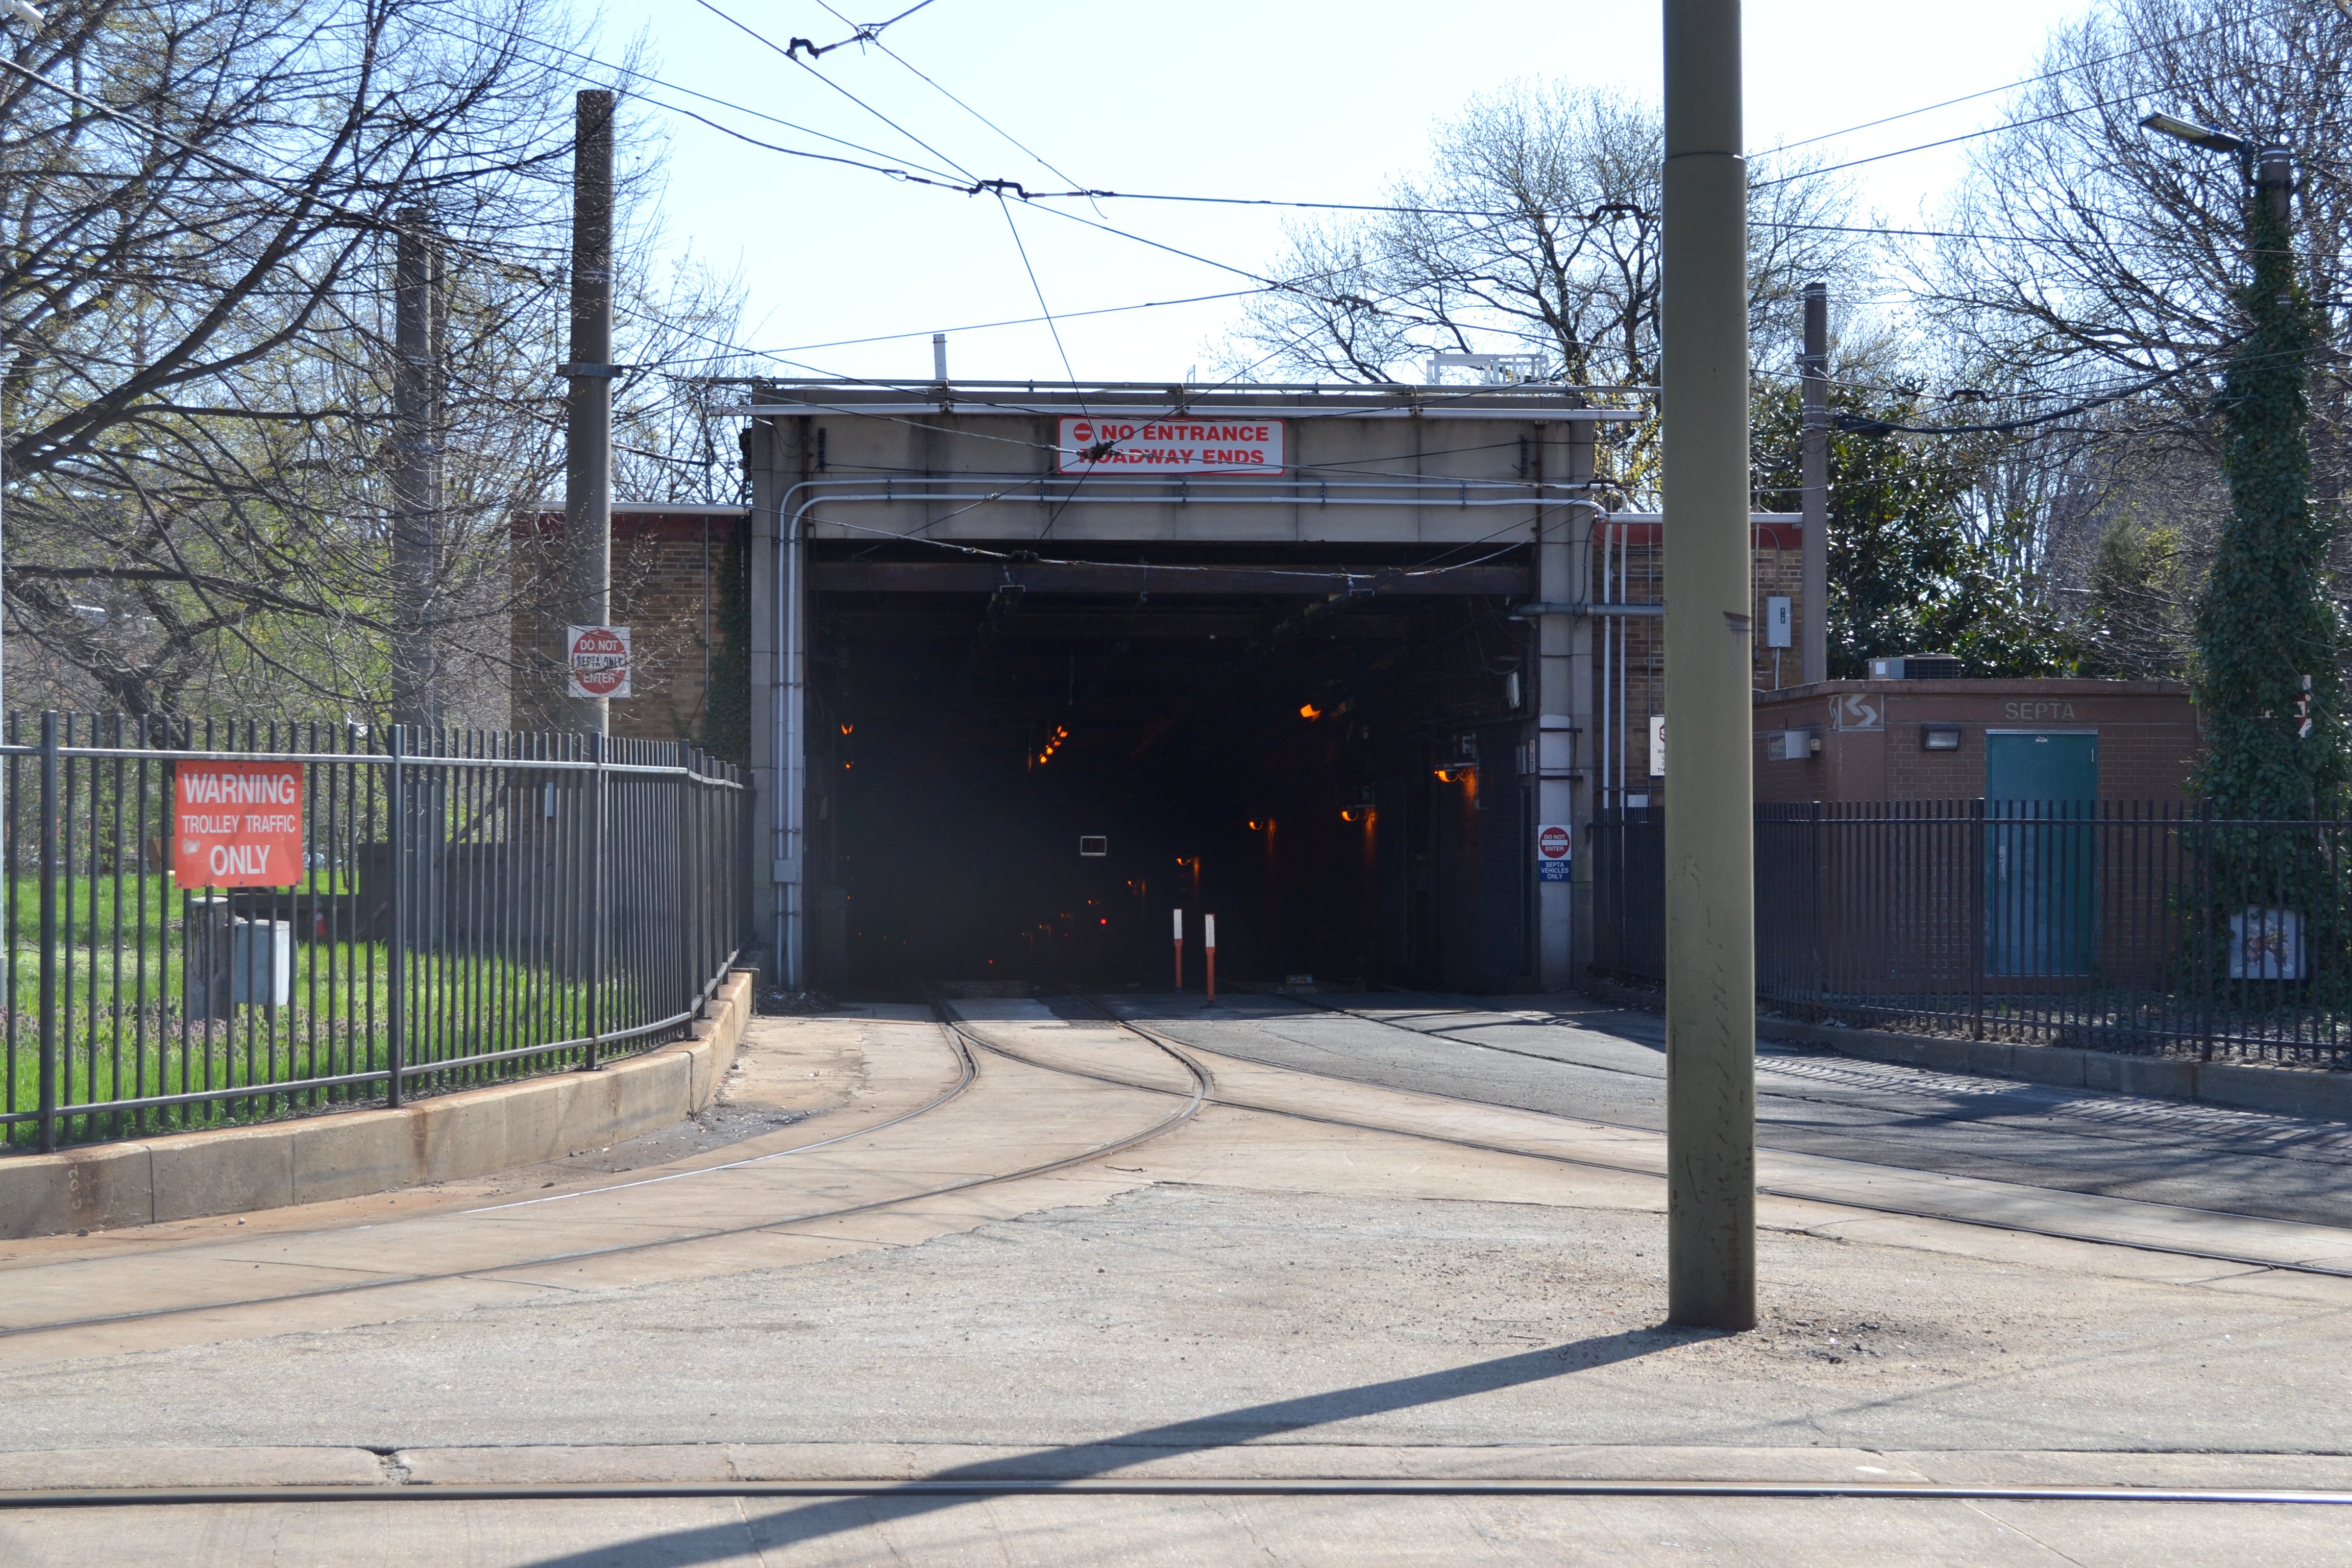 The portal is important for SEPTA as it's where trolleys enter and exit the tunnel in West Philly